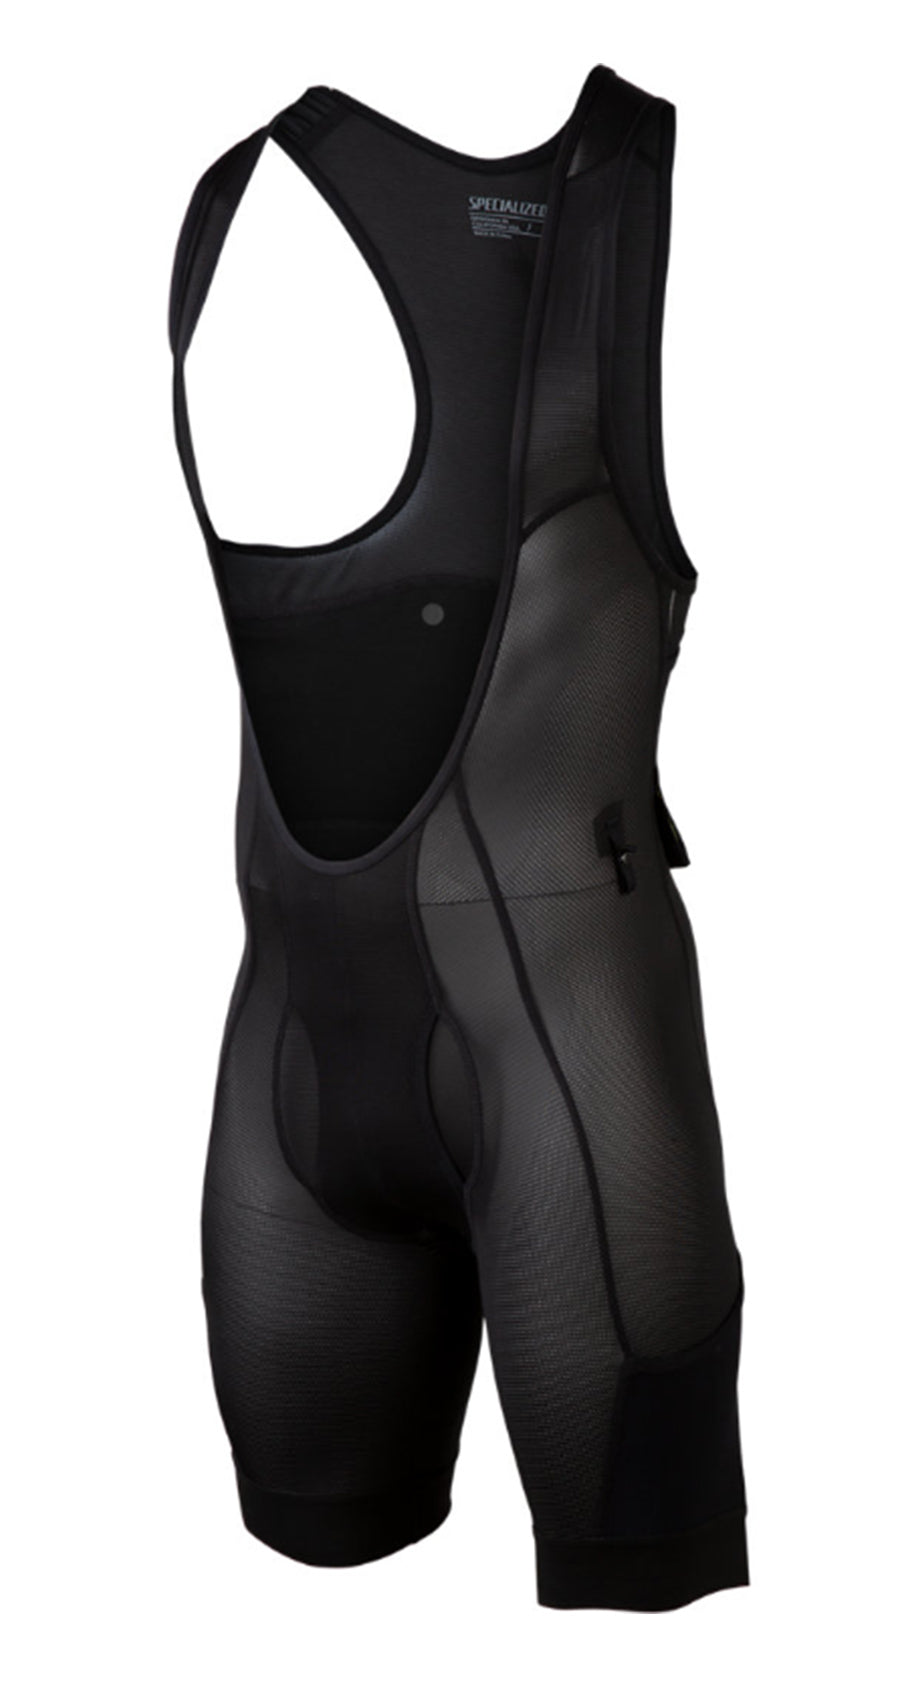 Specialized Mountain Liner Bib Short with SWAT - XS